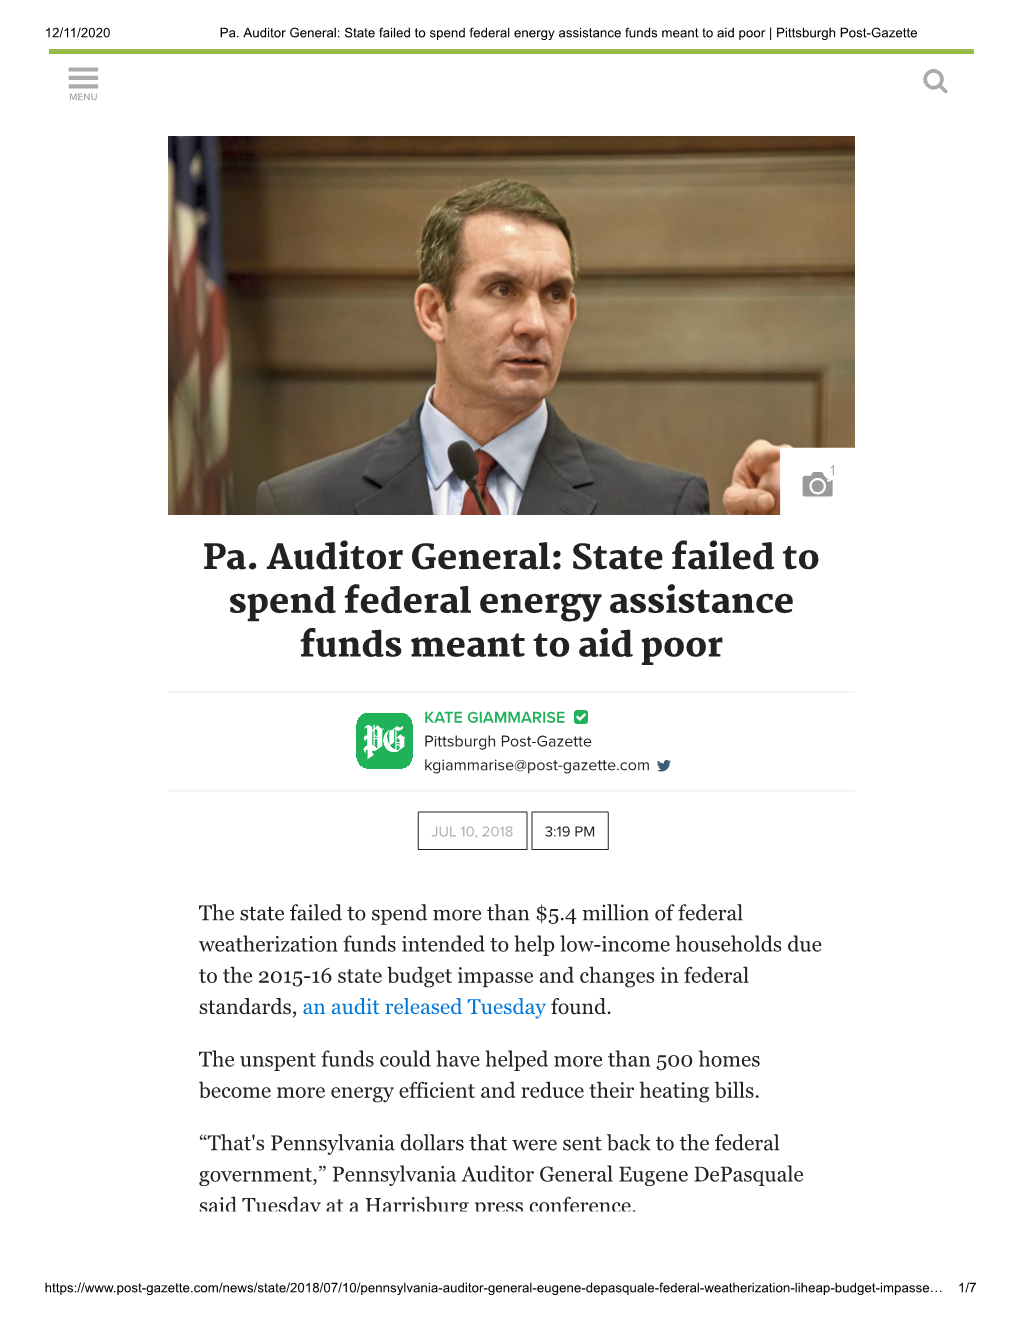 Pa. Auditor General: State Failed to Spend Federal Energy Assistance Funds Meant to Aid Poor | Pittsburgh Post-Gazette